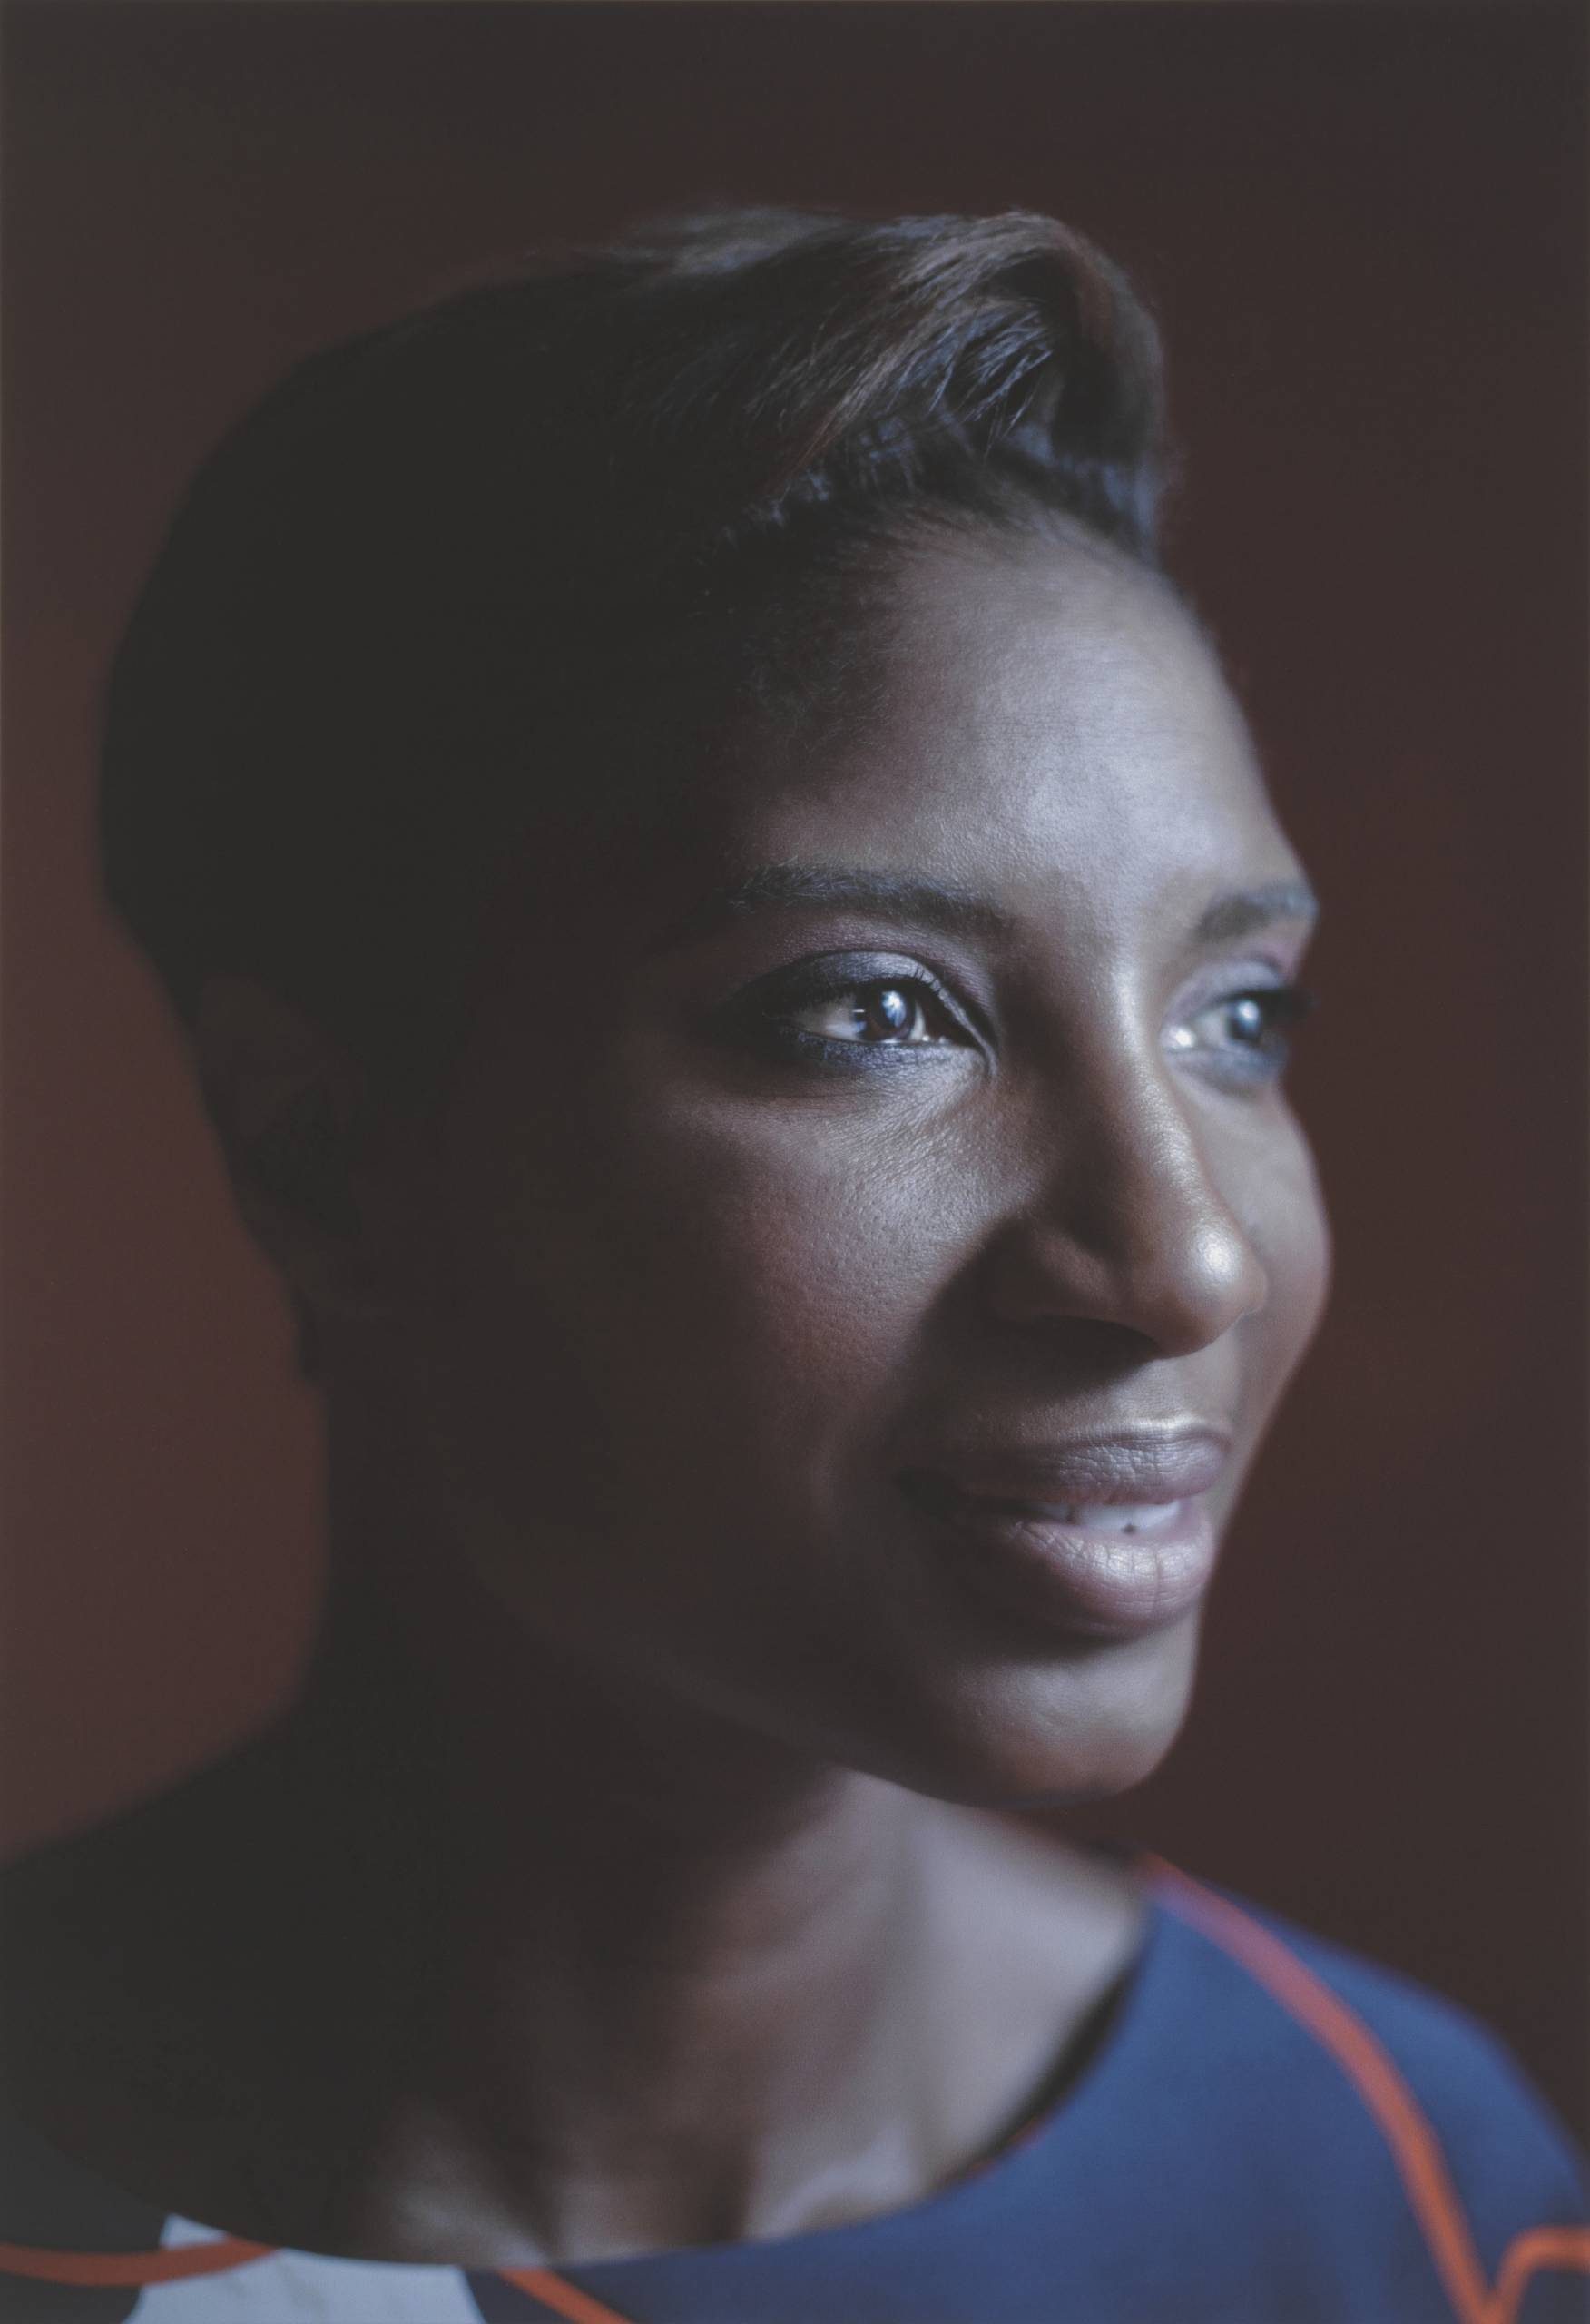 A close-up portrait photograph of a Black woman with brown eyes, smooth skin and short brown hair, her head slightly turned to one side against a dark background, wearing a blue shirt with orange details.